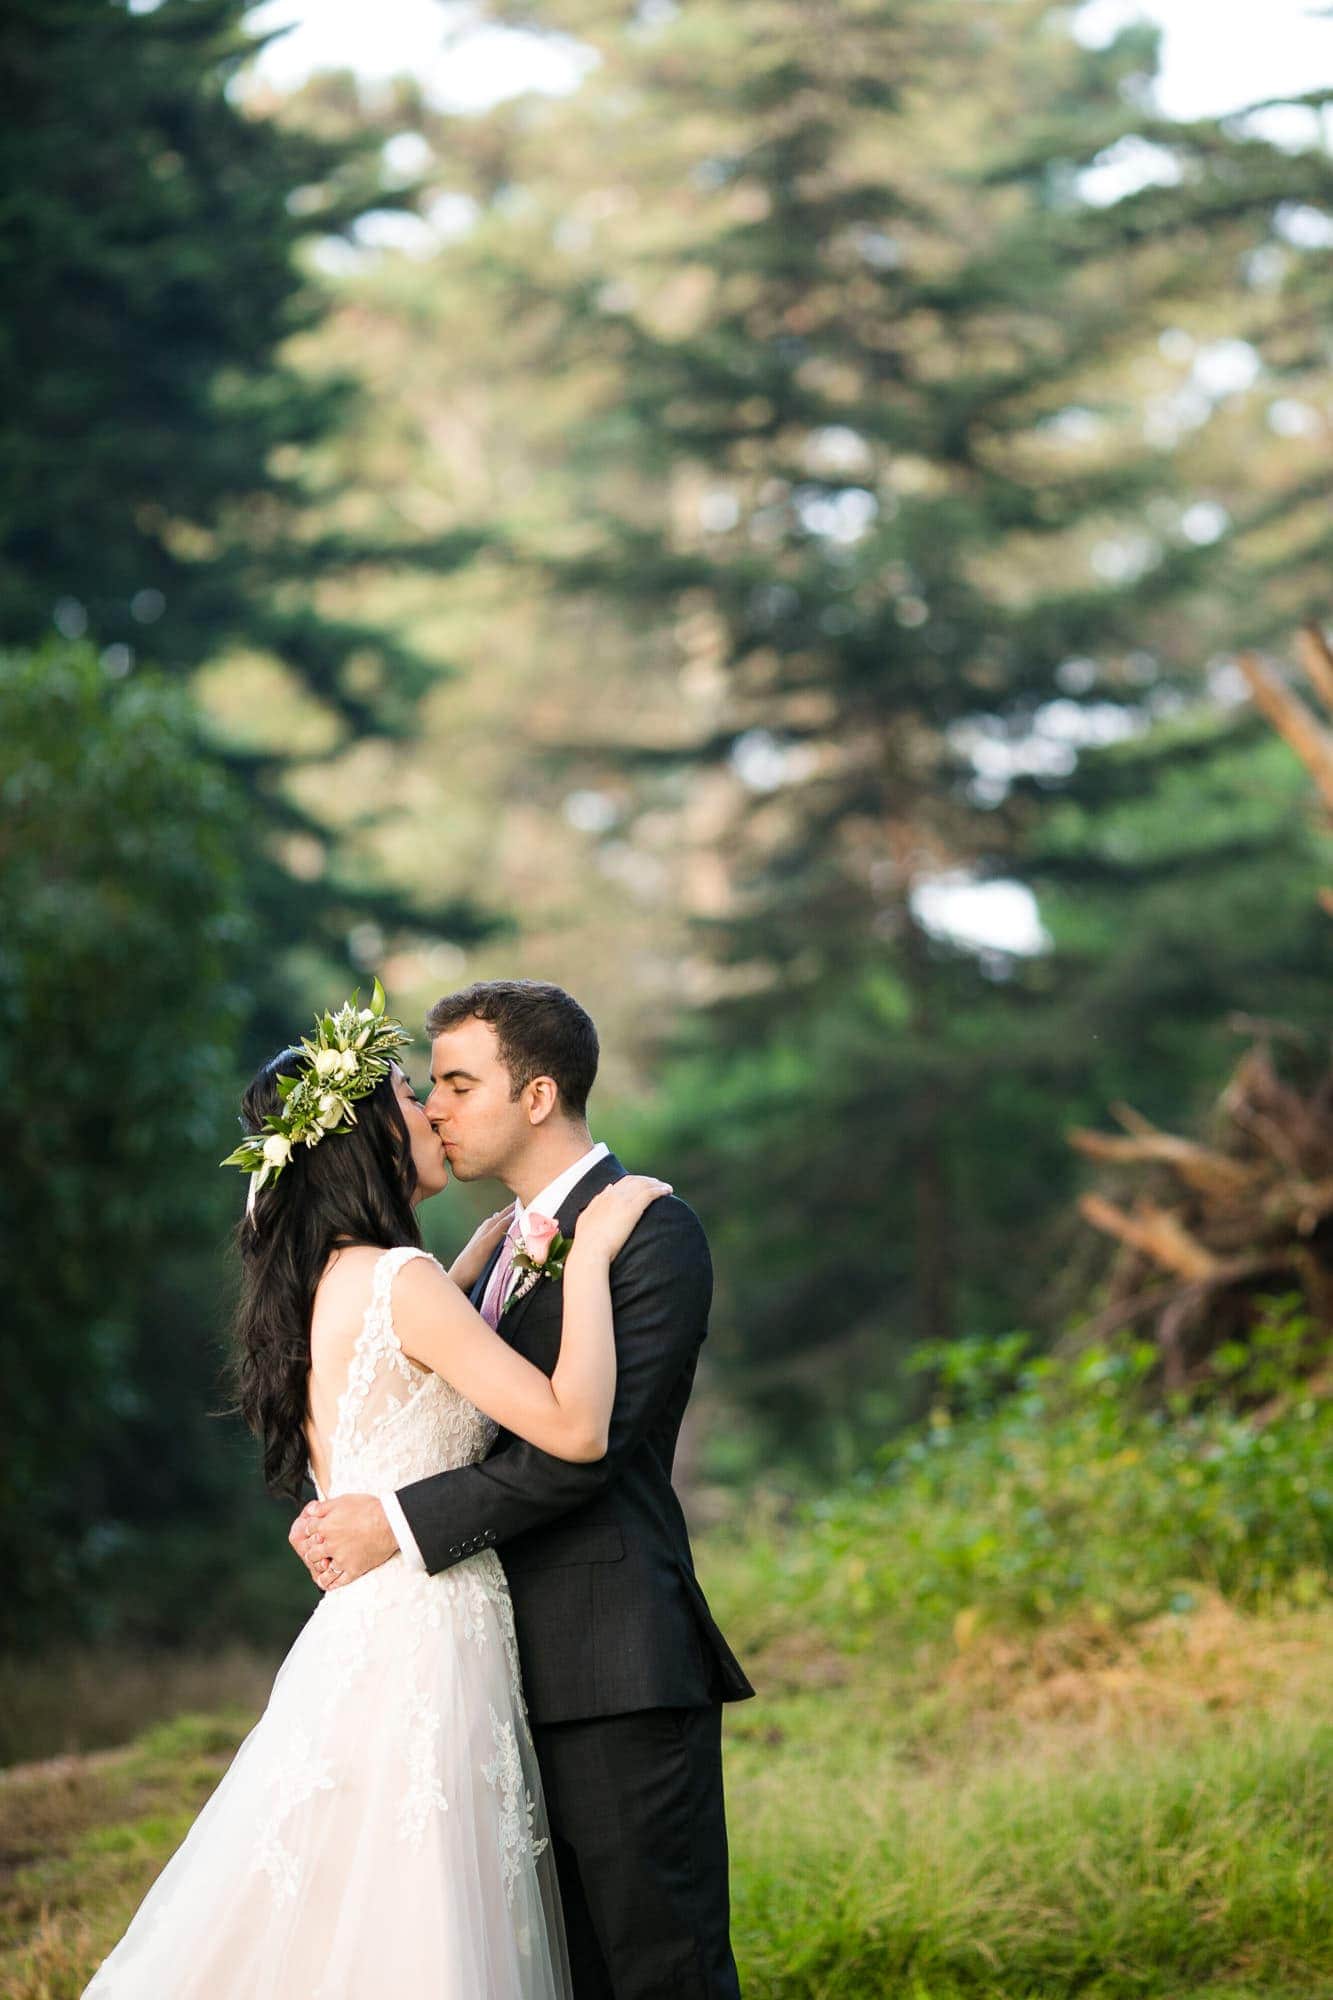 Wedding portraits of bride and groom post ceremony in Golden Gate Park